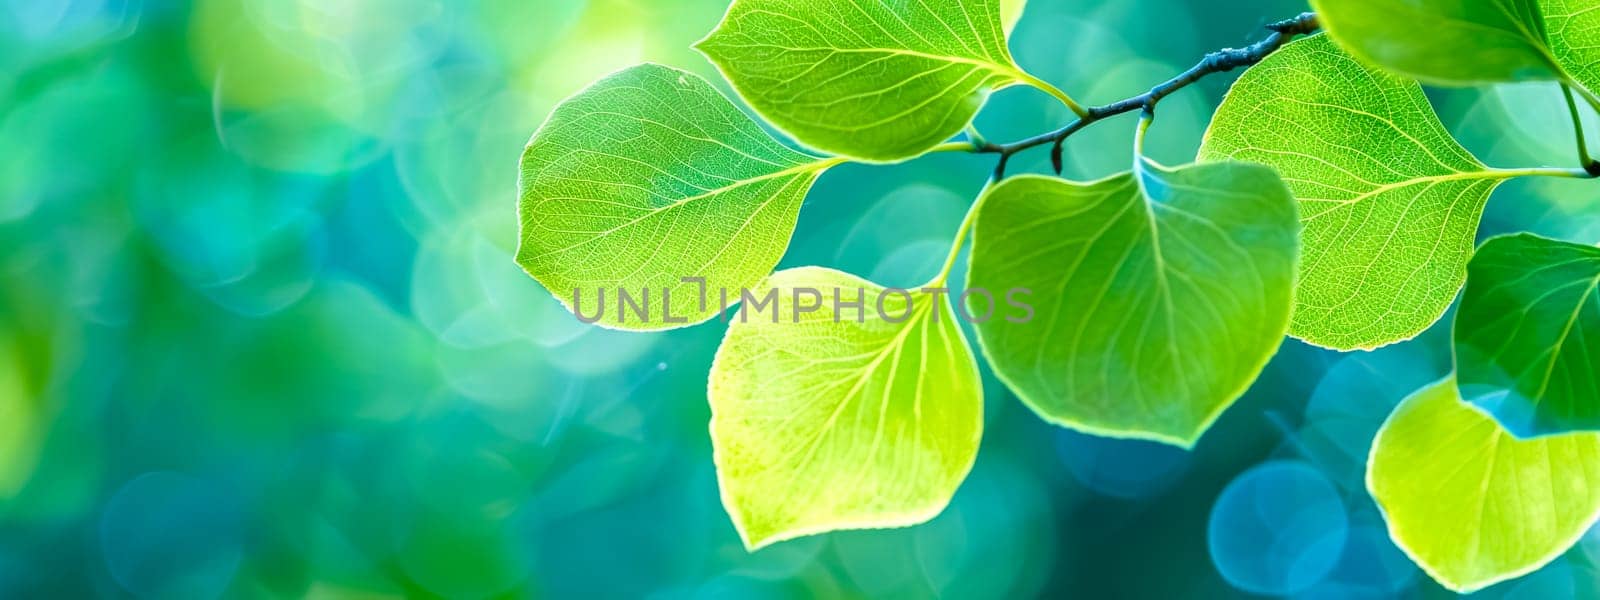 Luminous green leaves on tranquil blue background by Edophoto